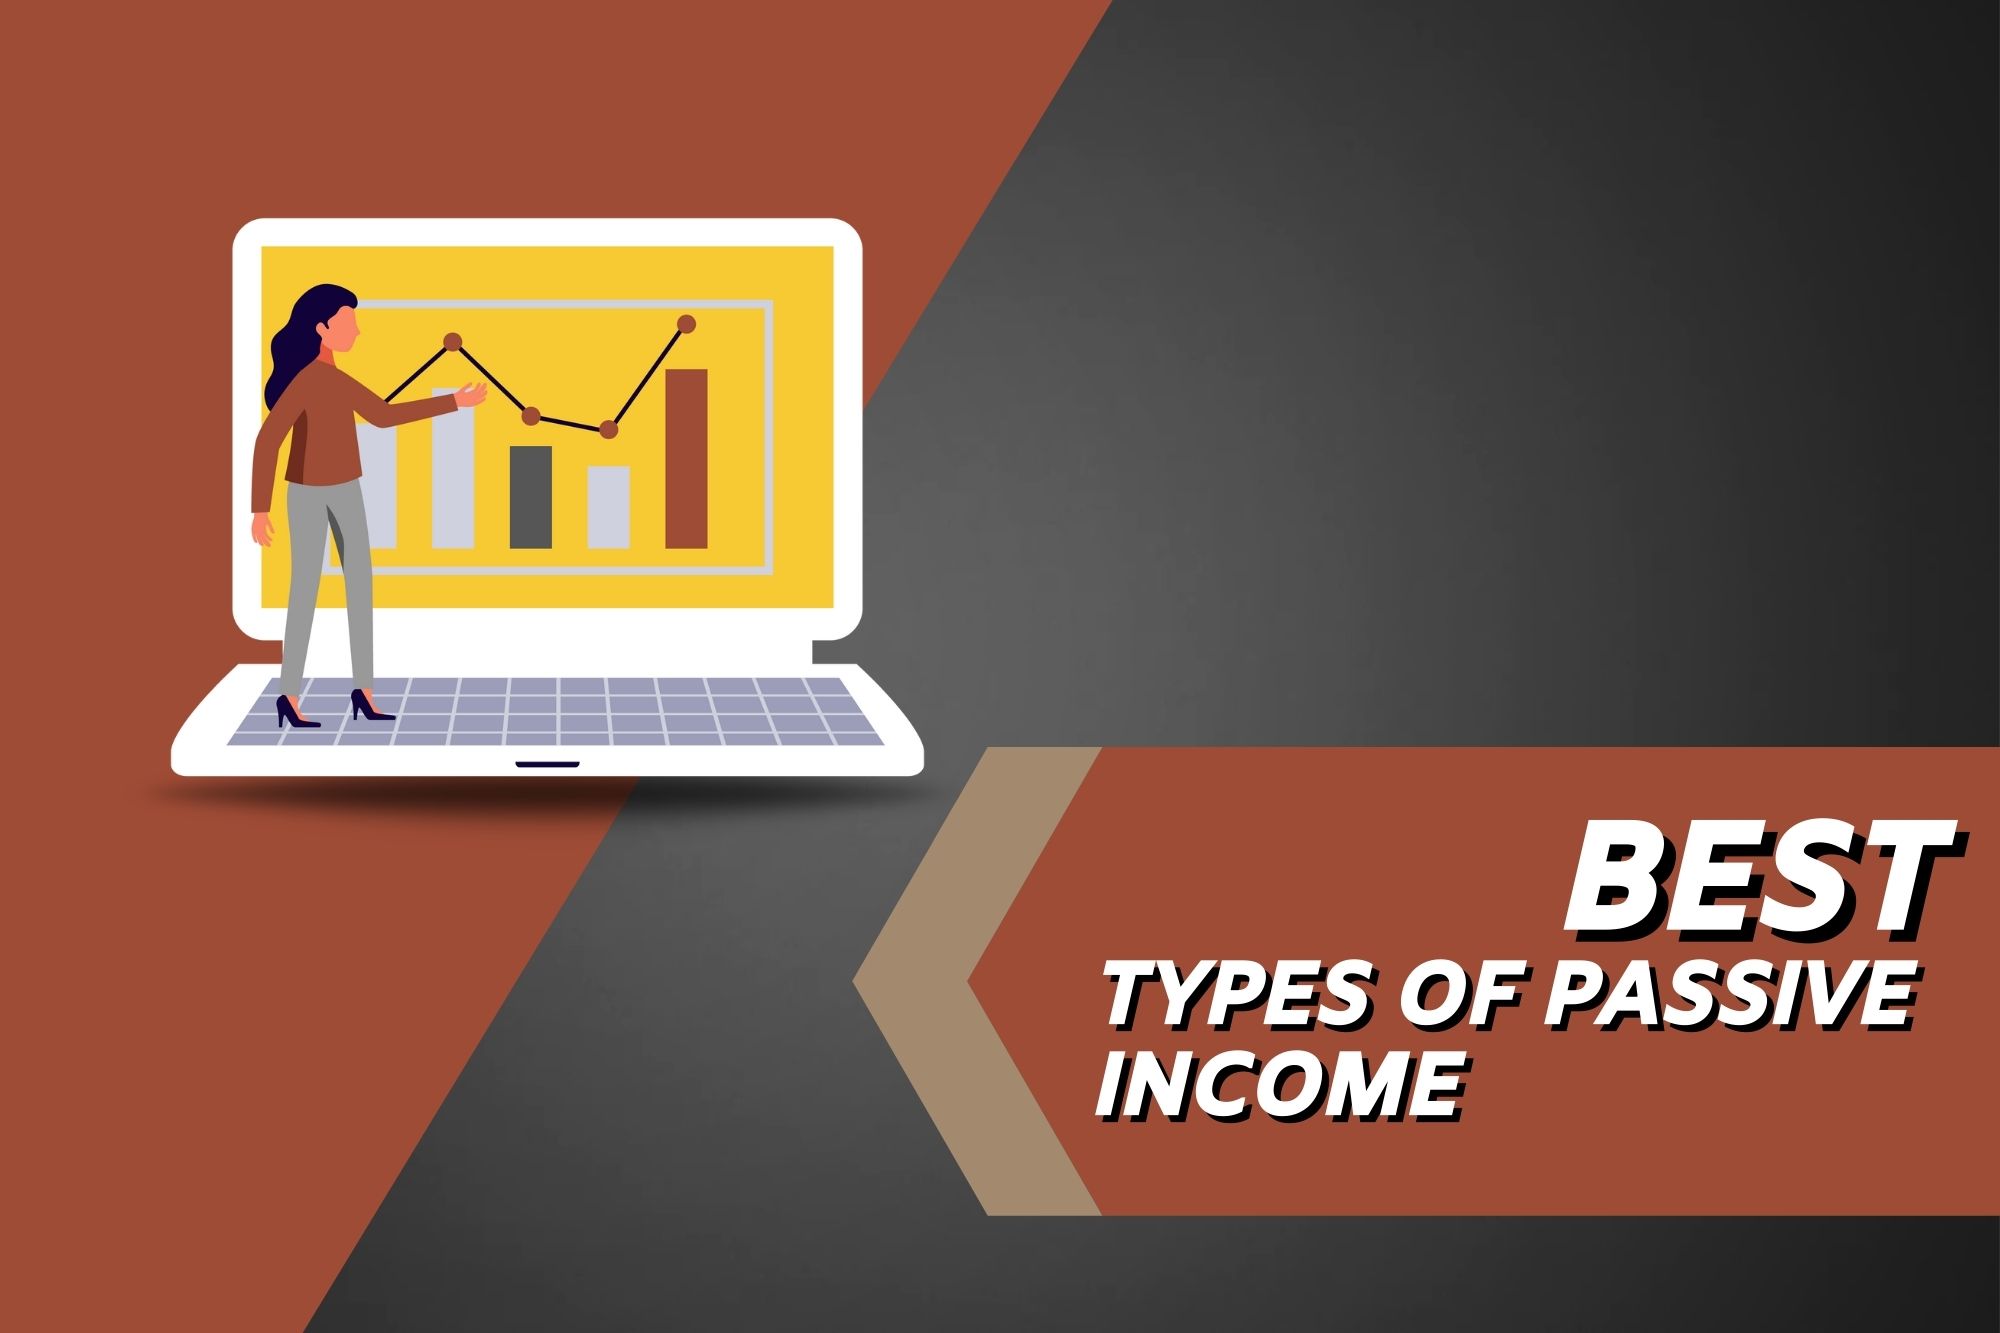 Best Types of Passive Income